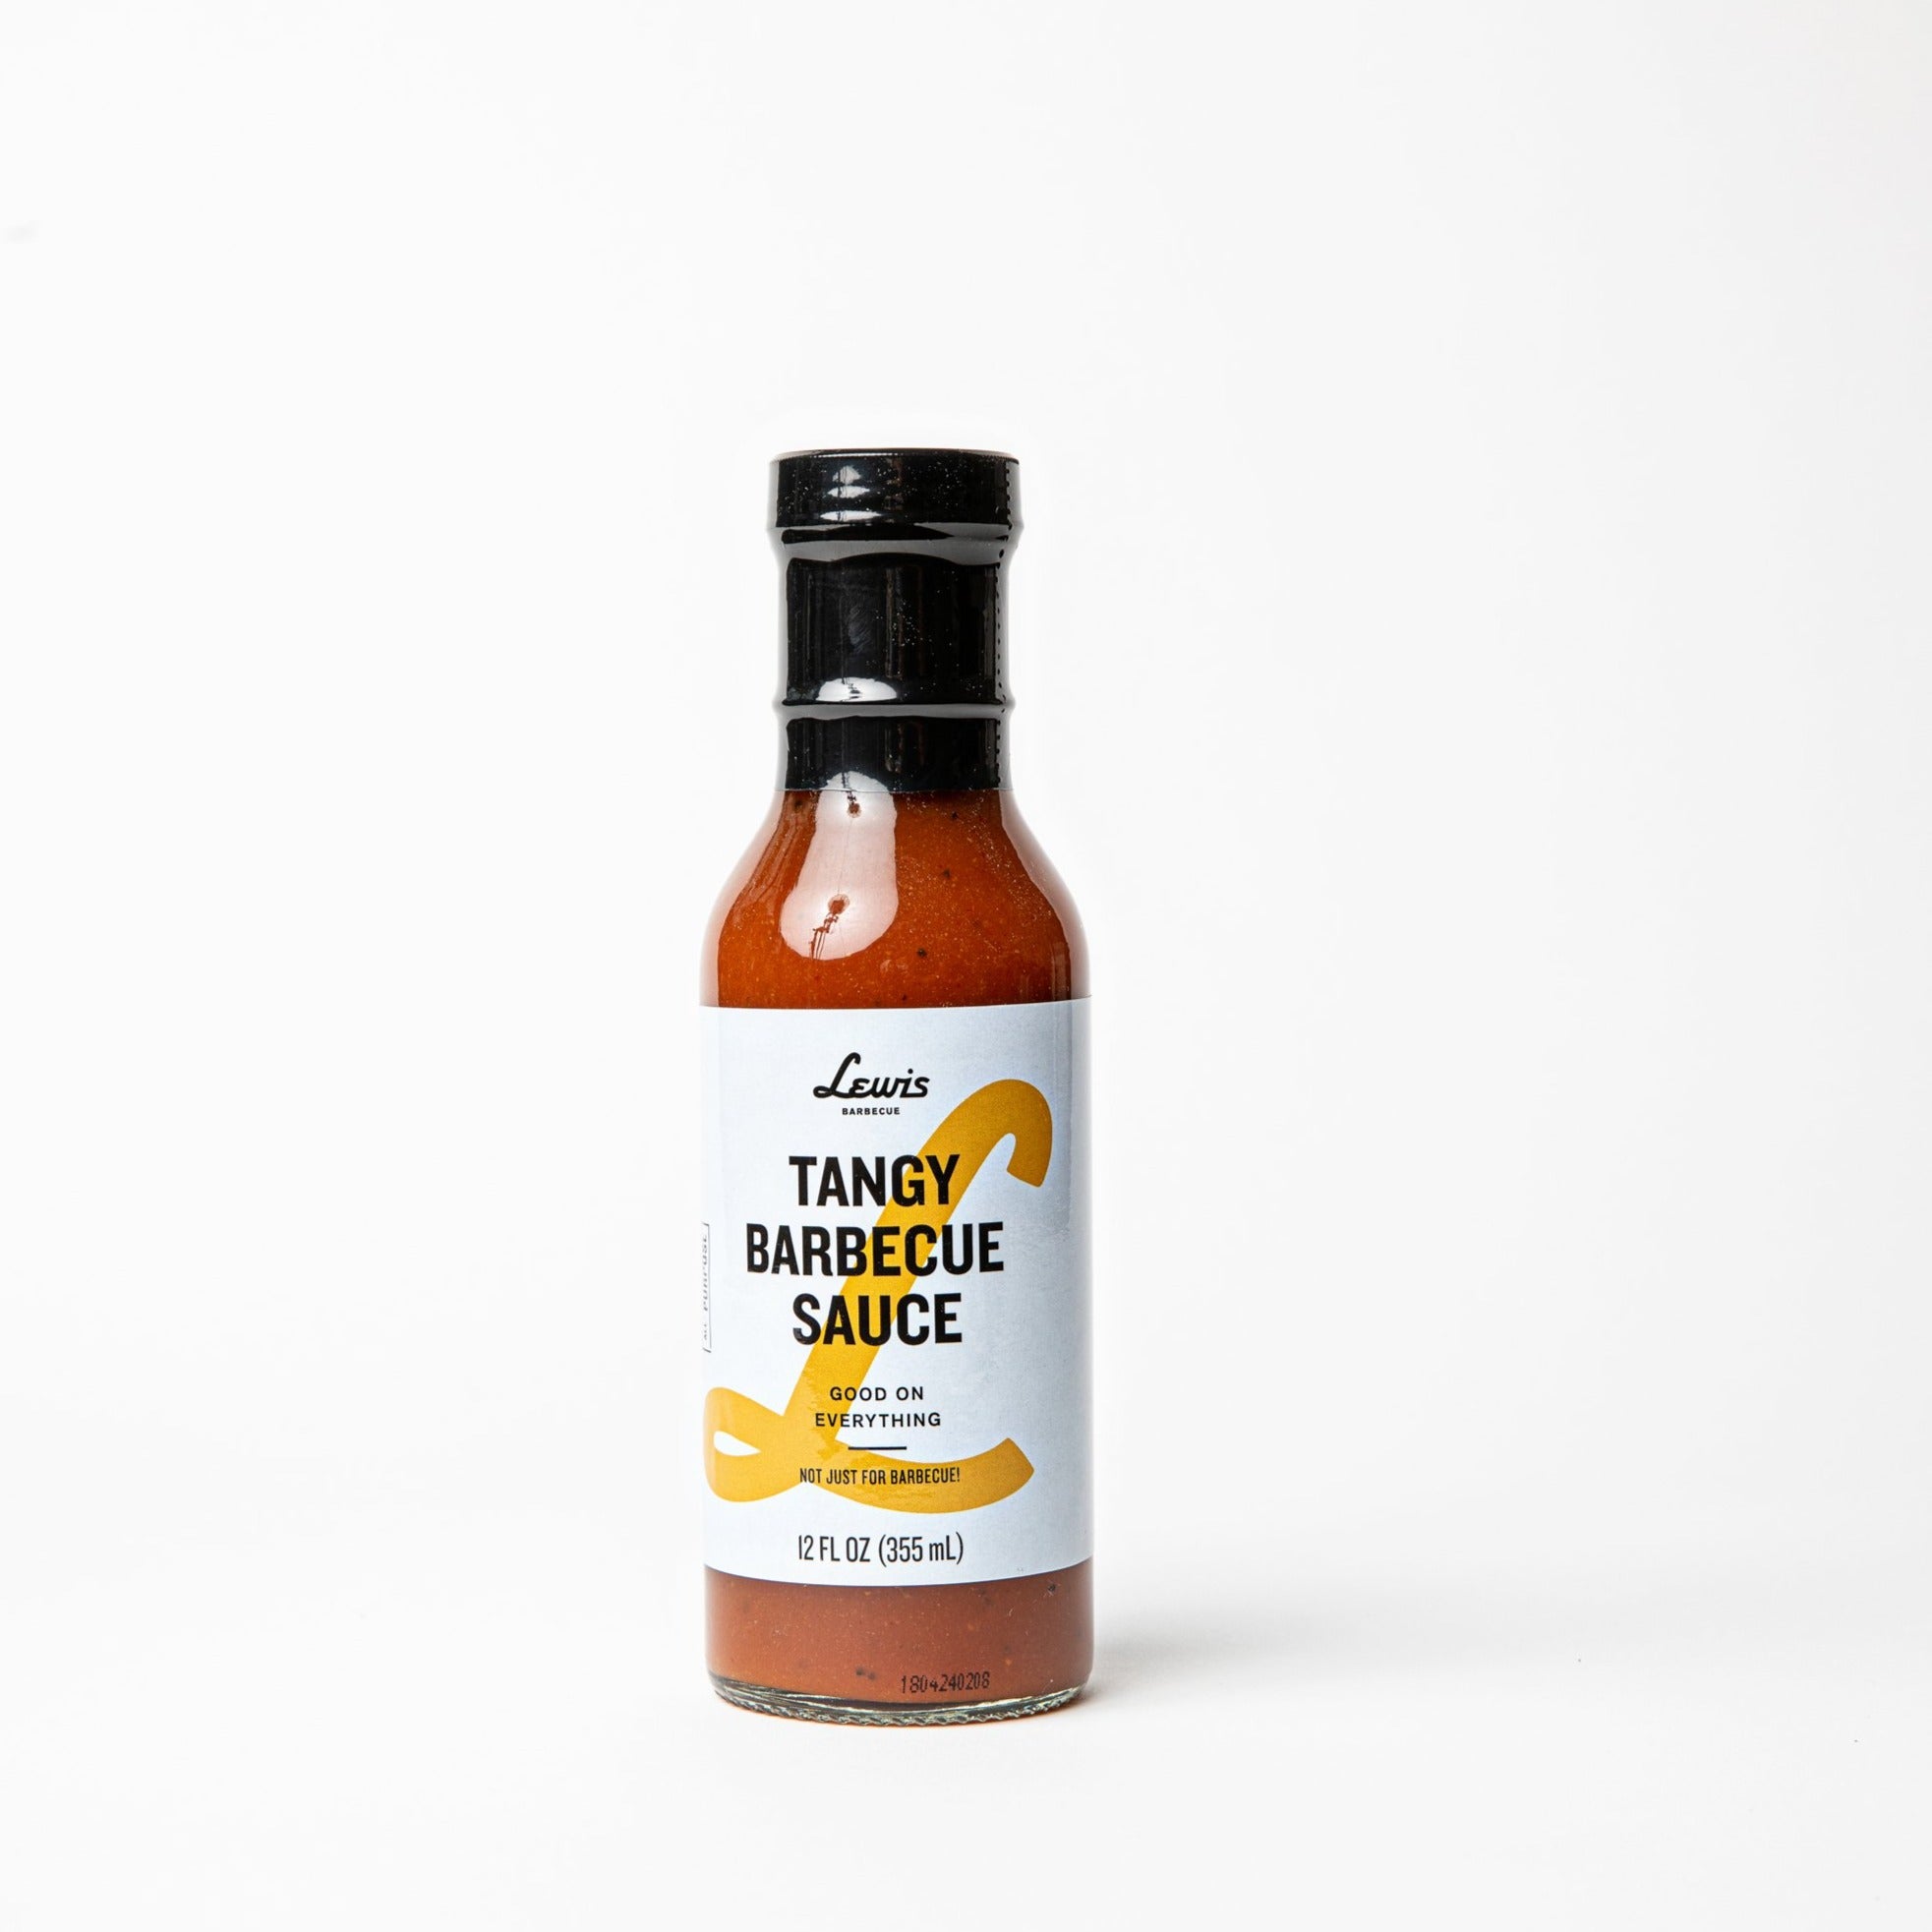 TANGY BARBECUE SAUCE